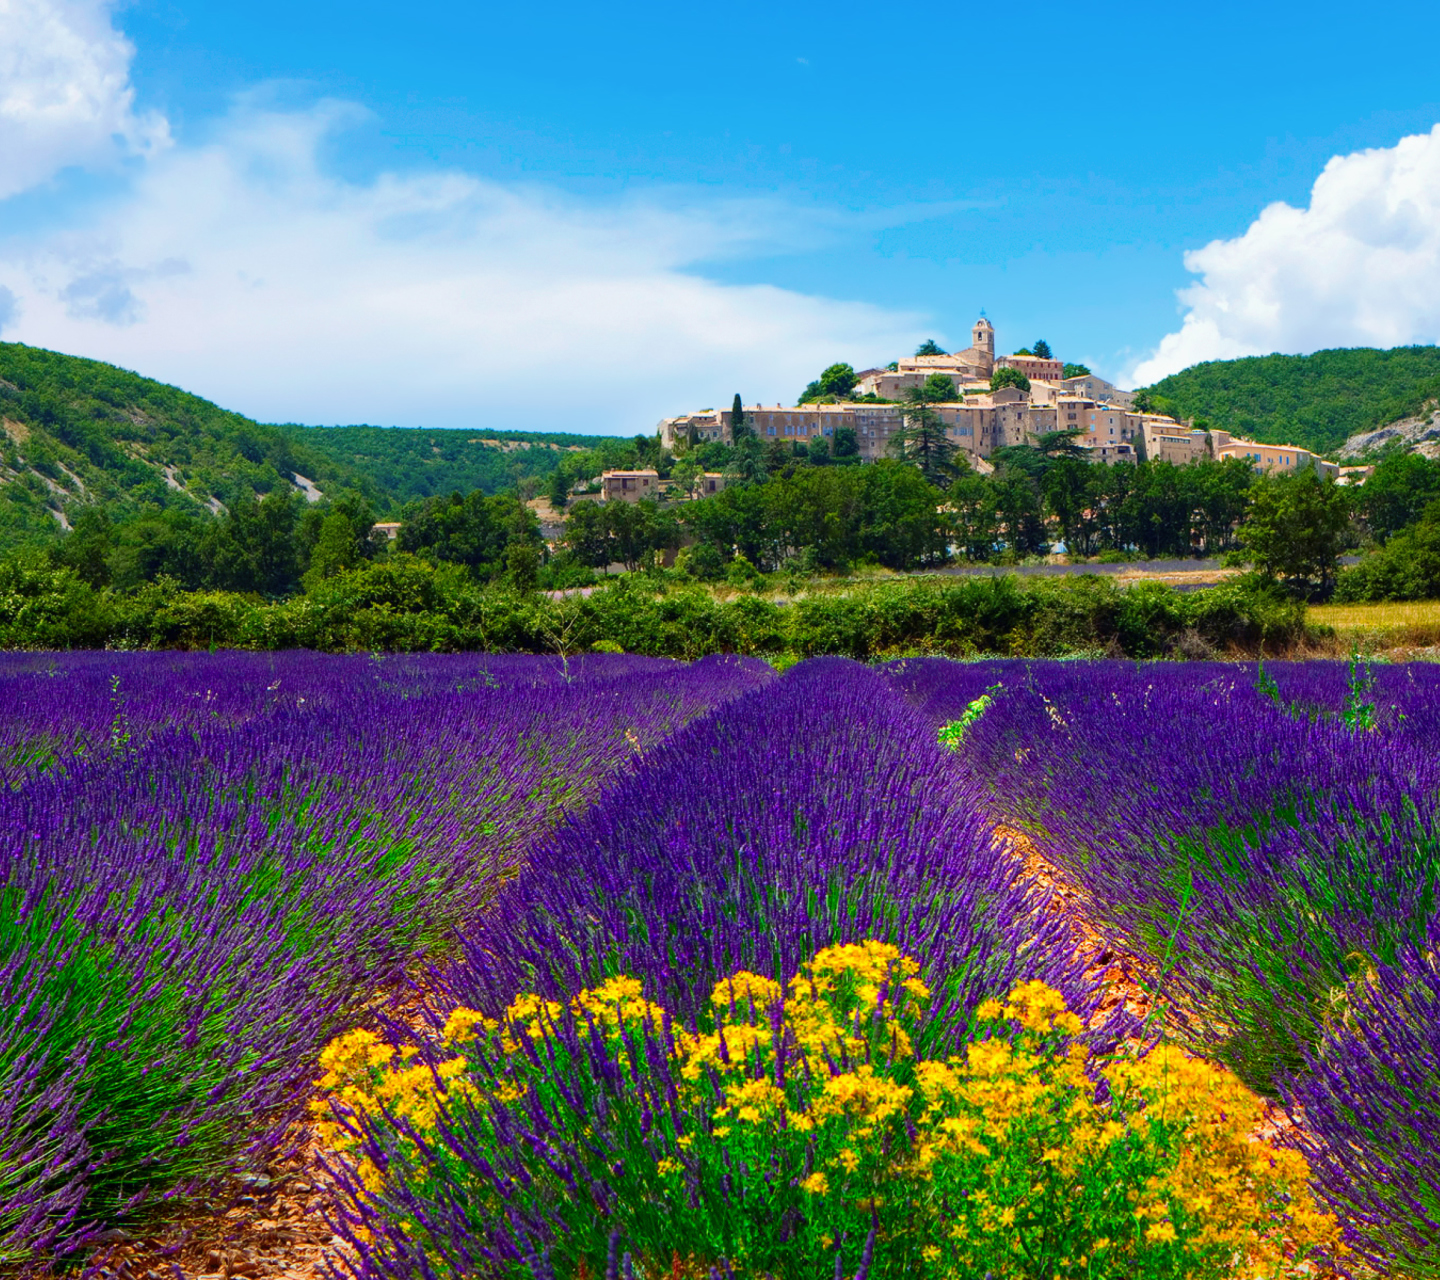 Lavender Field In Provence France screenshot #1 1440x1280